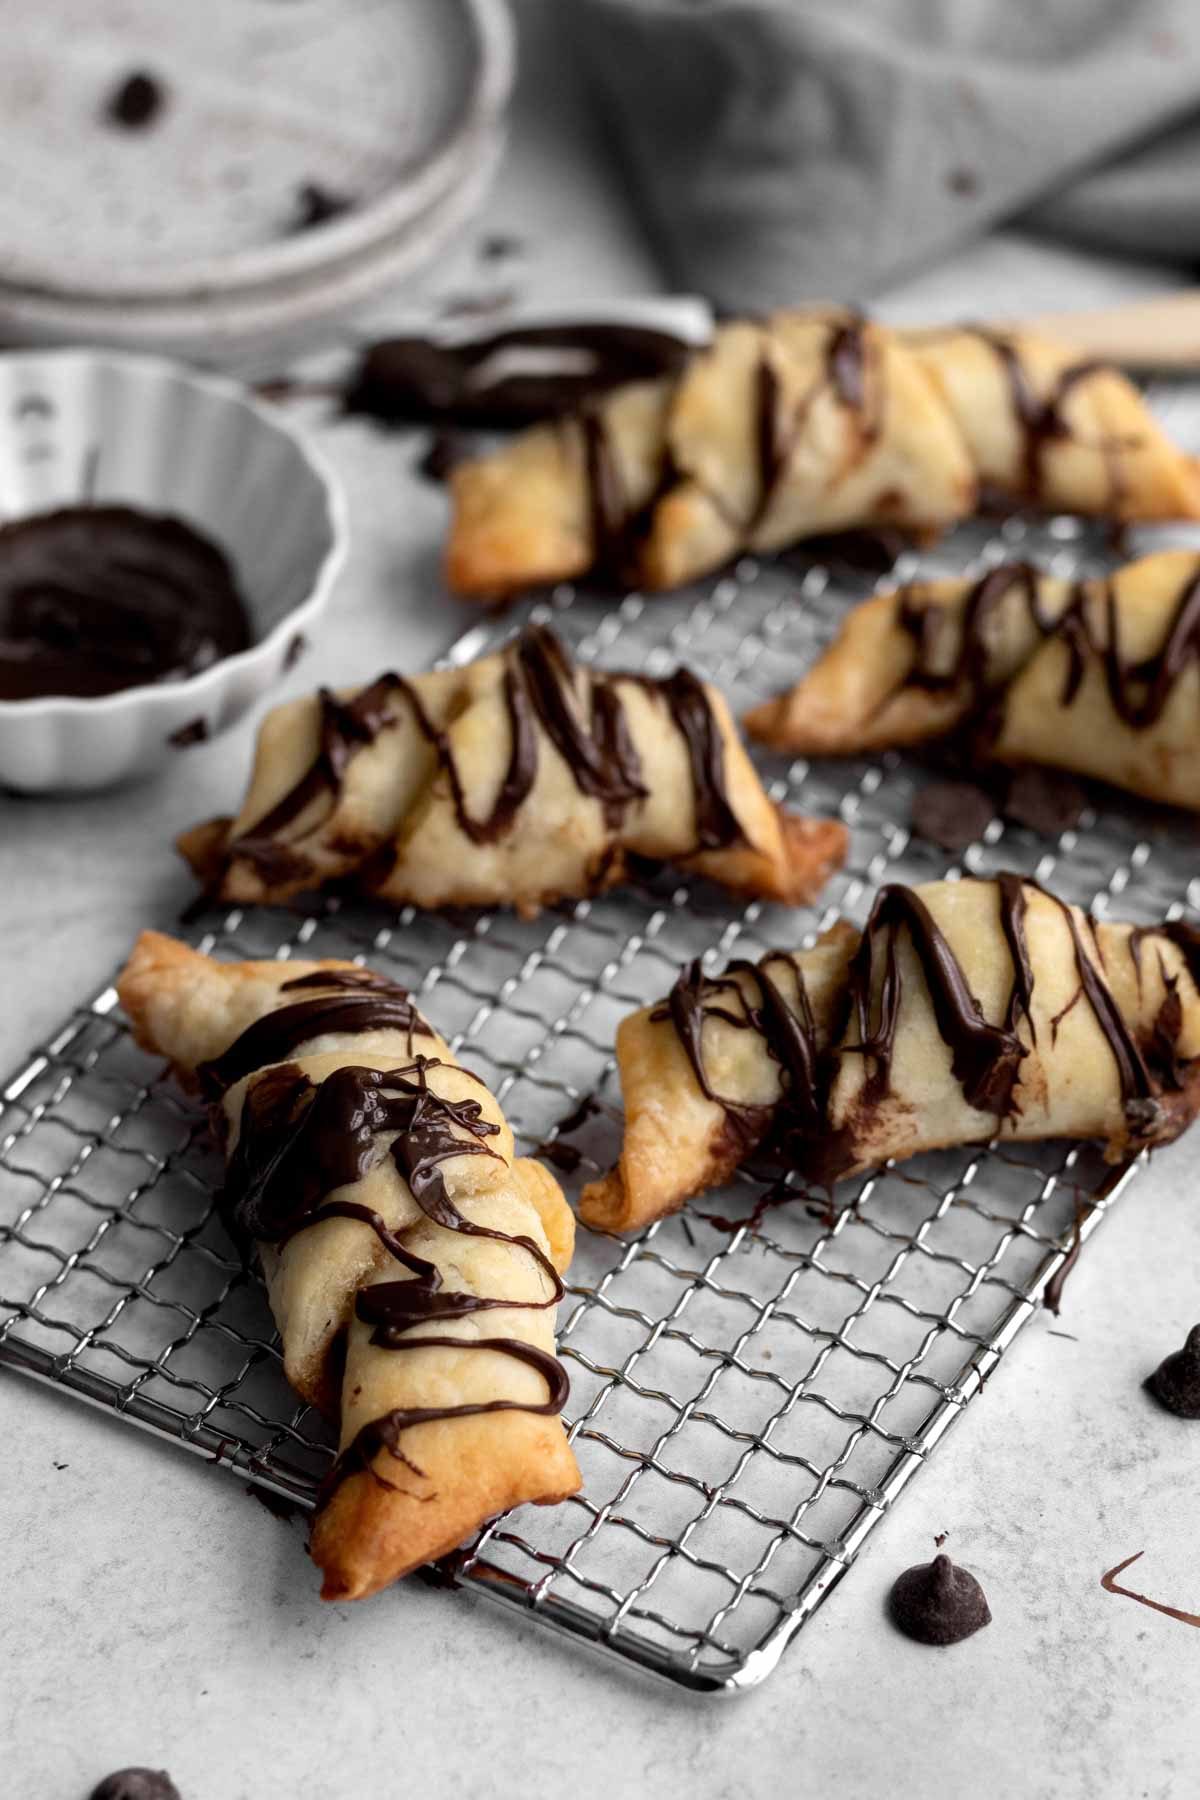 Five gluten free Puff Pastries with Chocolate drizzled in chocolate.